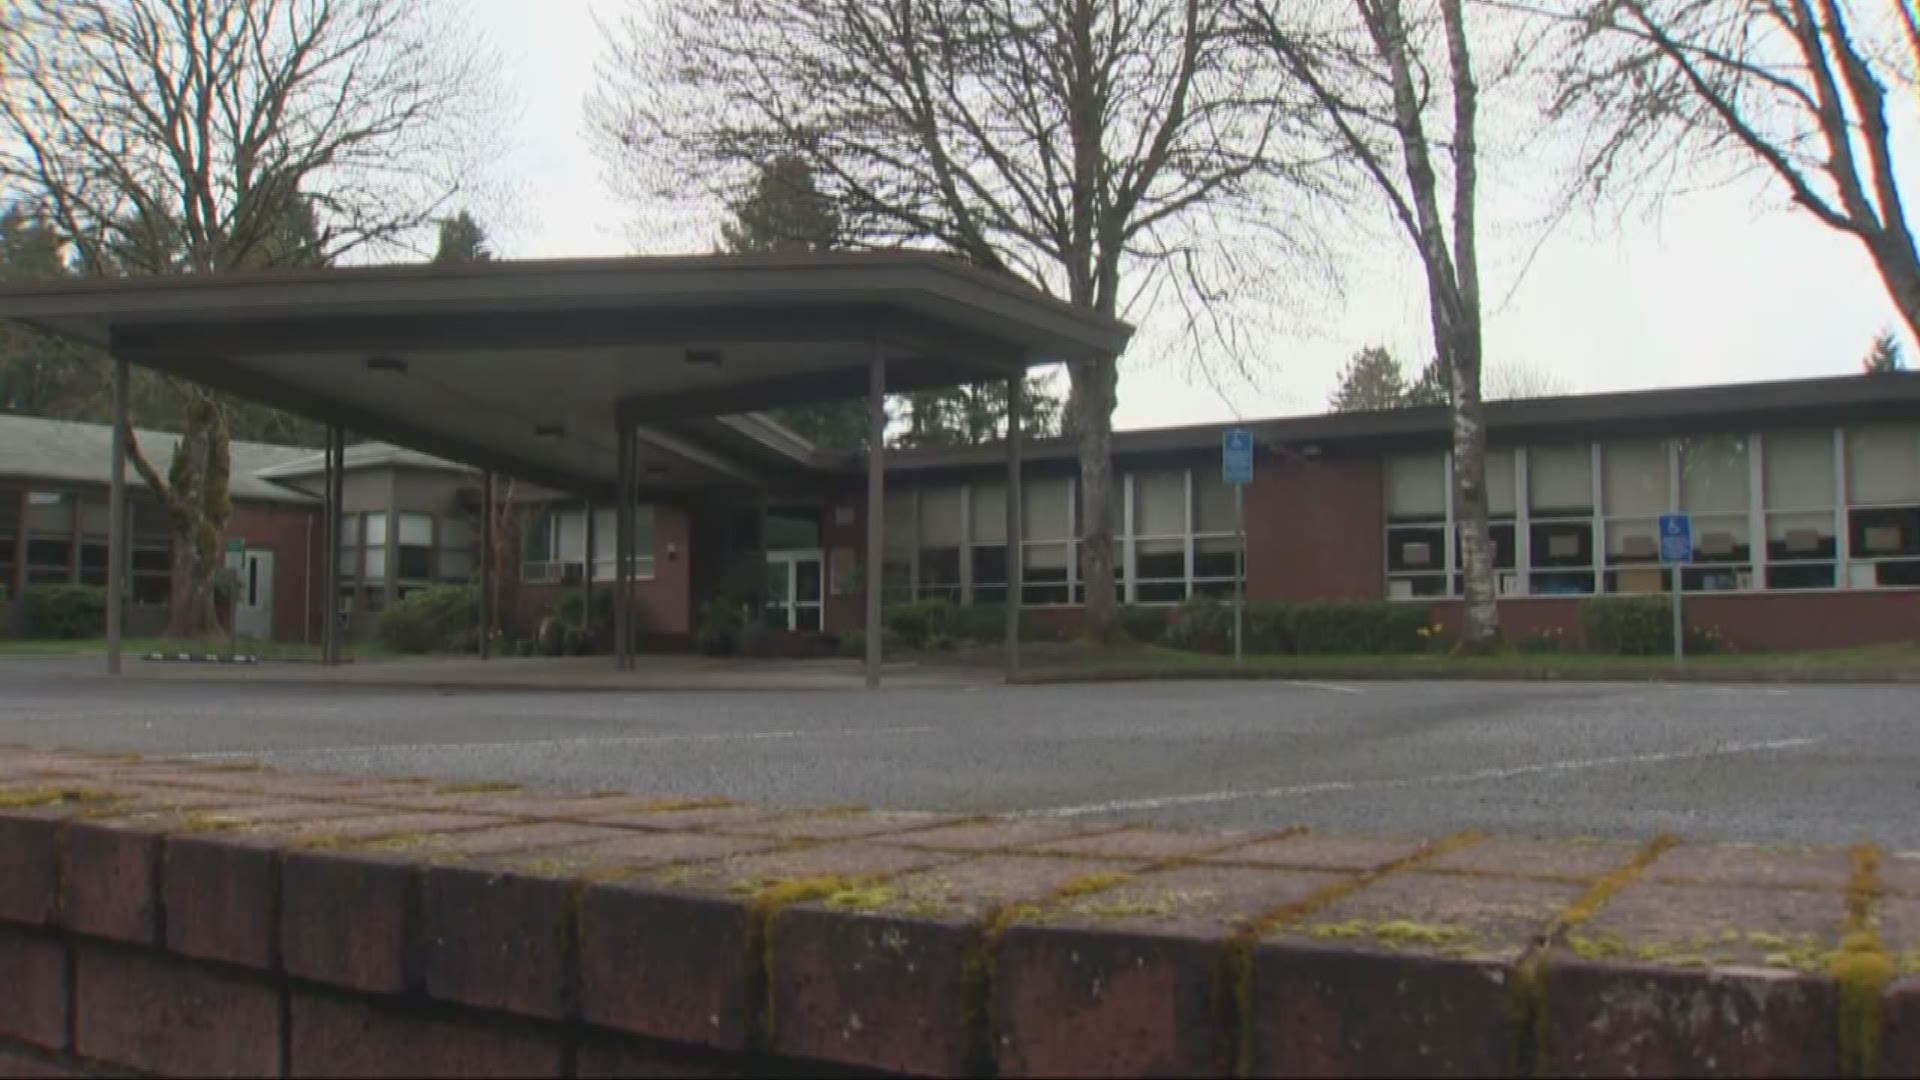 Forest Hills Elementary School will be closed through March 4 after a school employee tested positive for coronavirus on Friday, the first presumed case in Oregon.